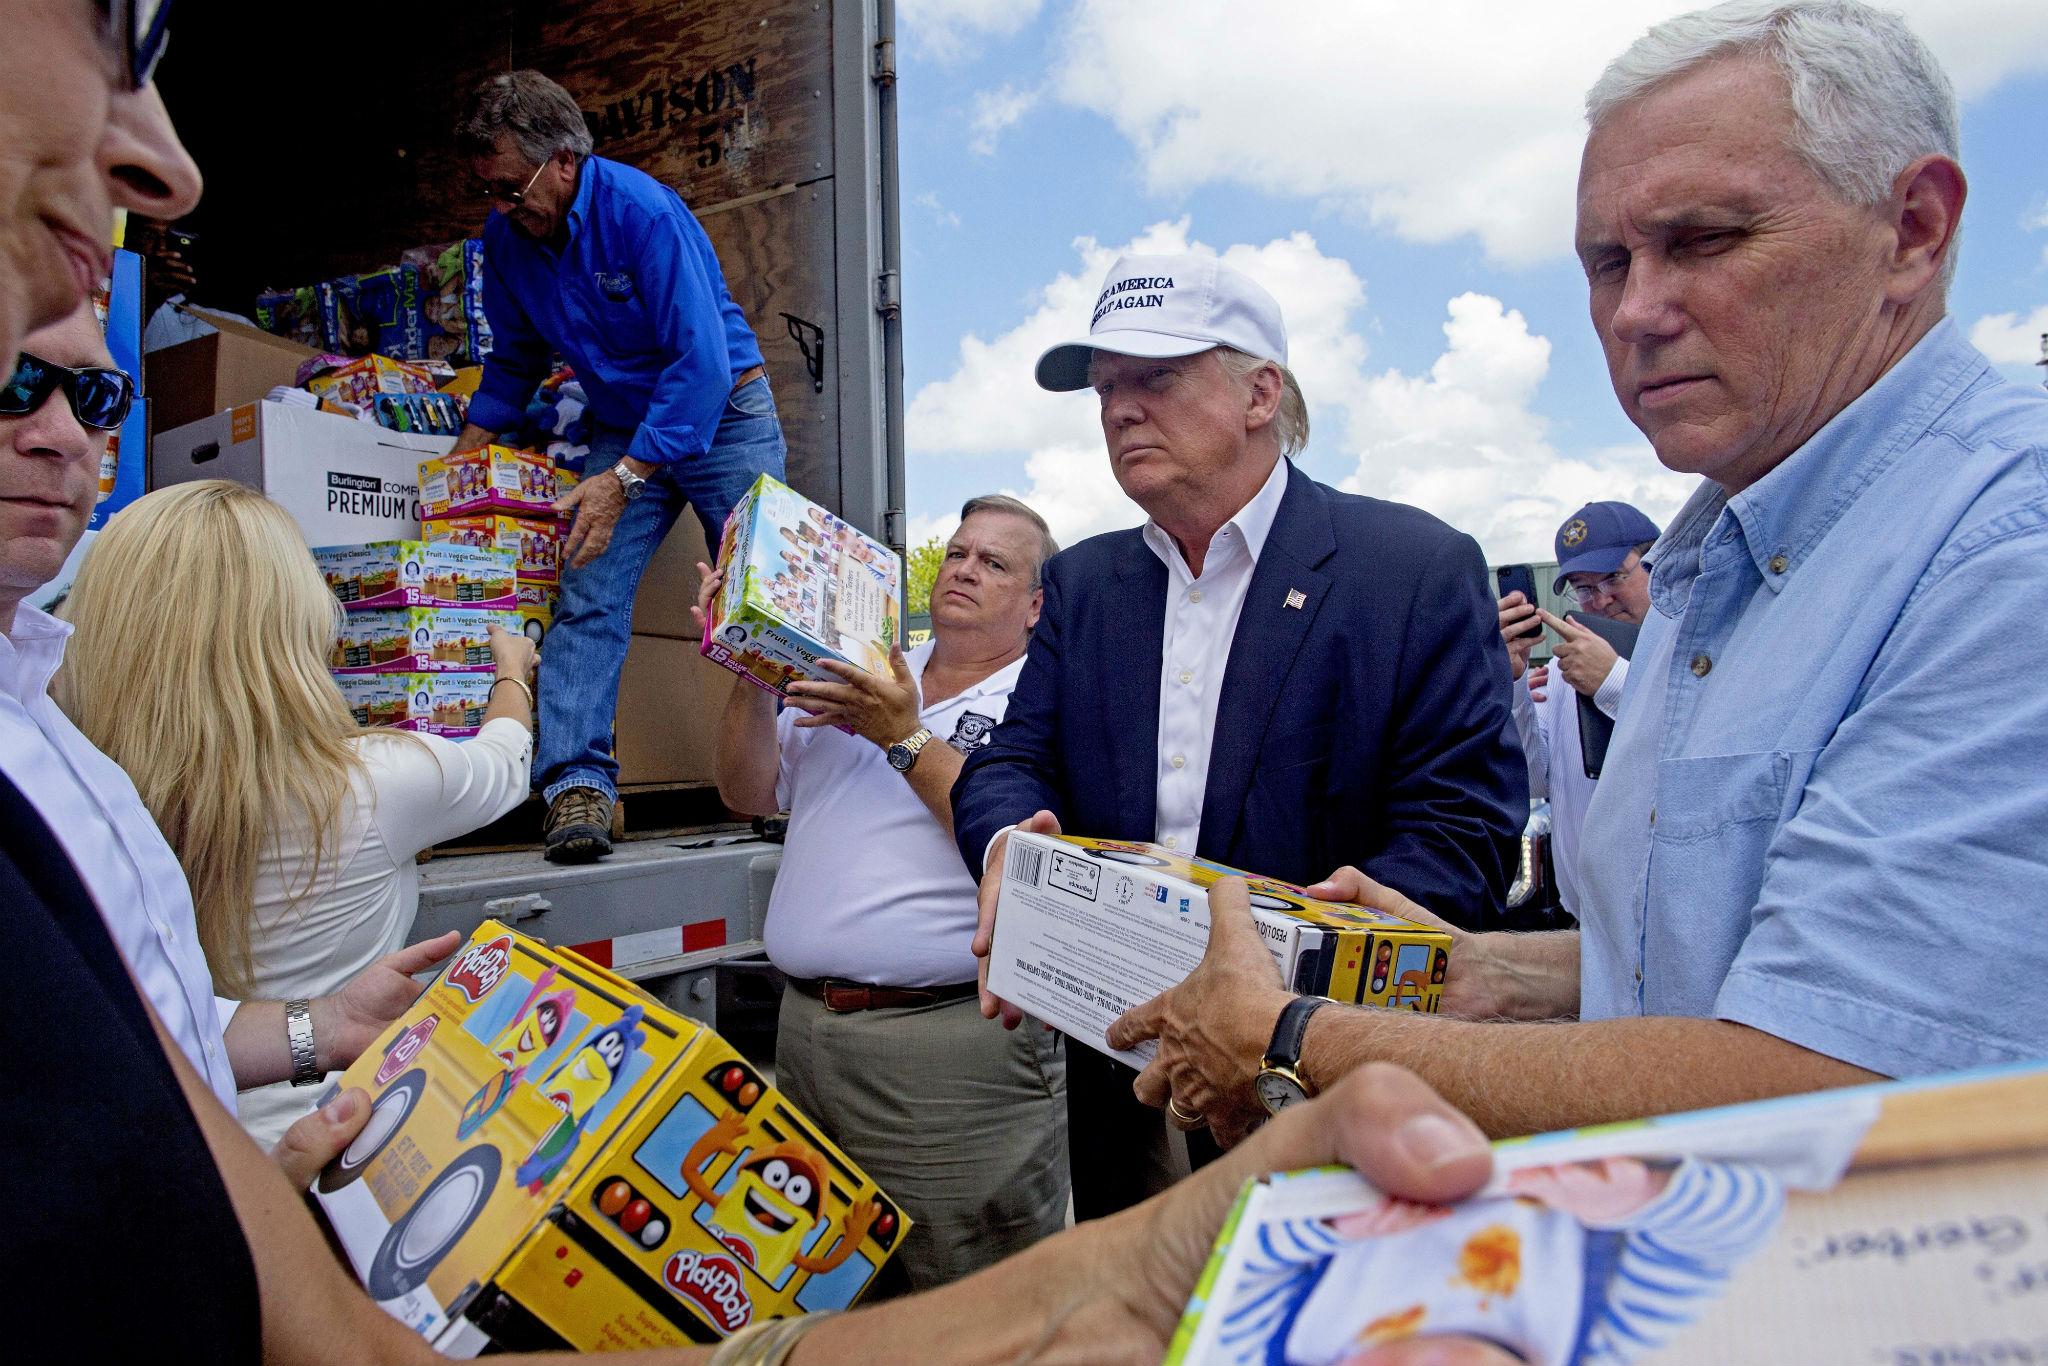 Republican presidential nominee Donald Trump and his running mate Mike Pence hand out supplies to flood-affected Louisiana residents on Friday, 19 August (AP)